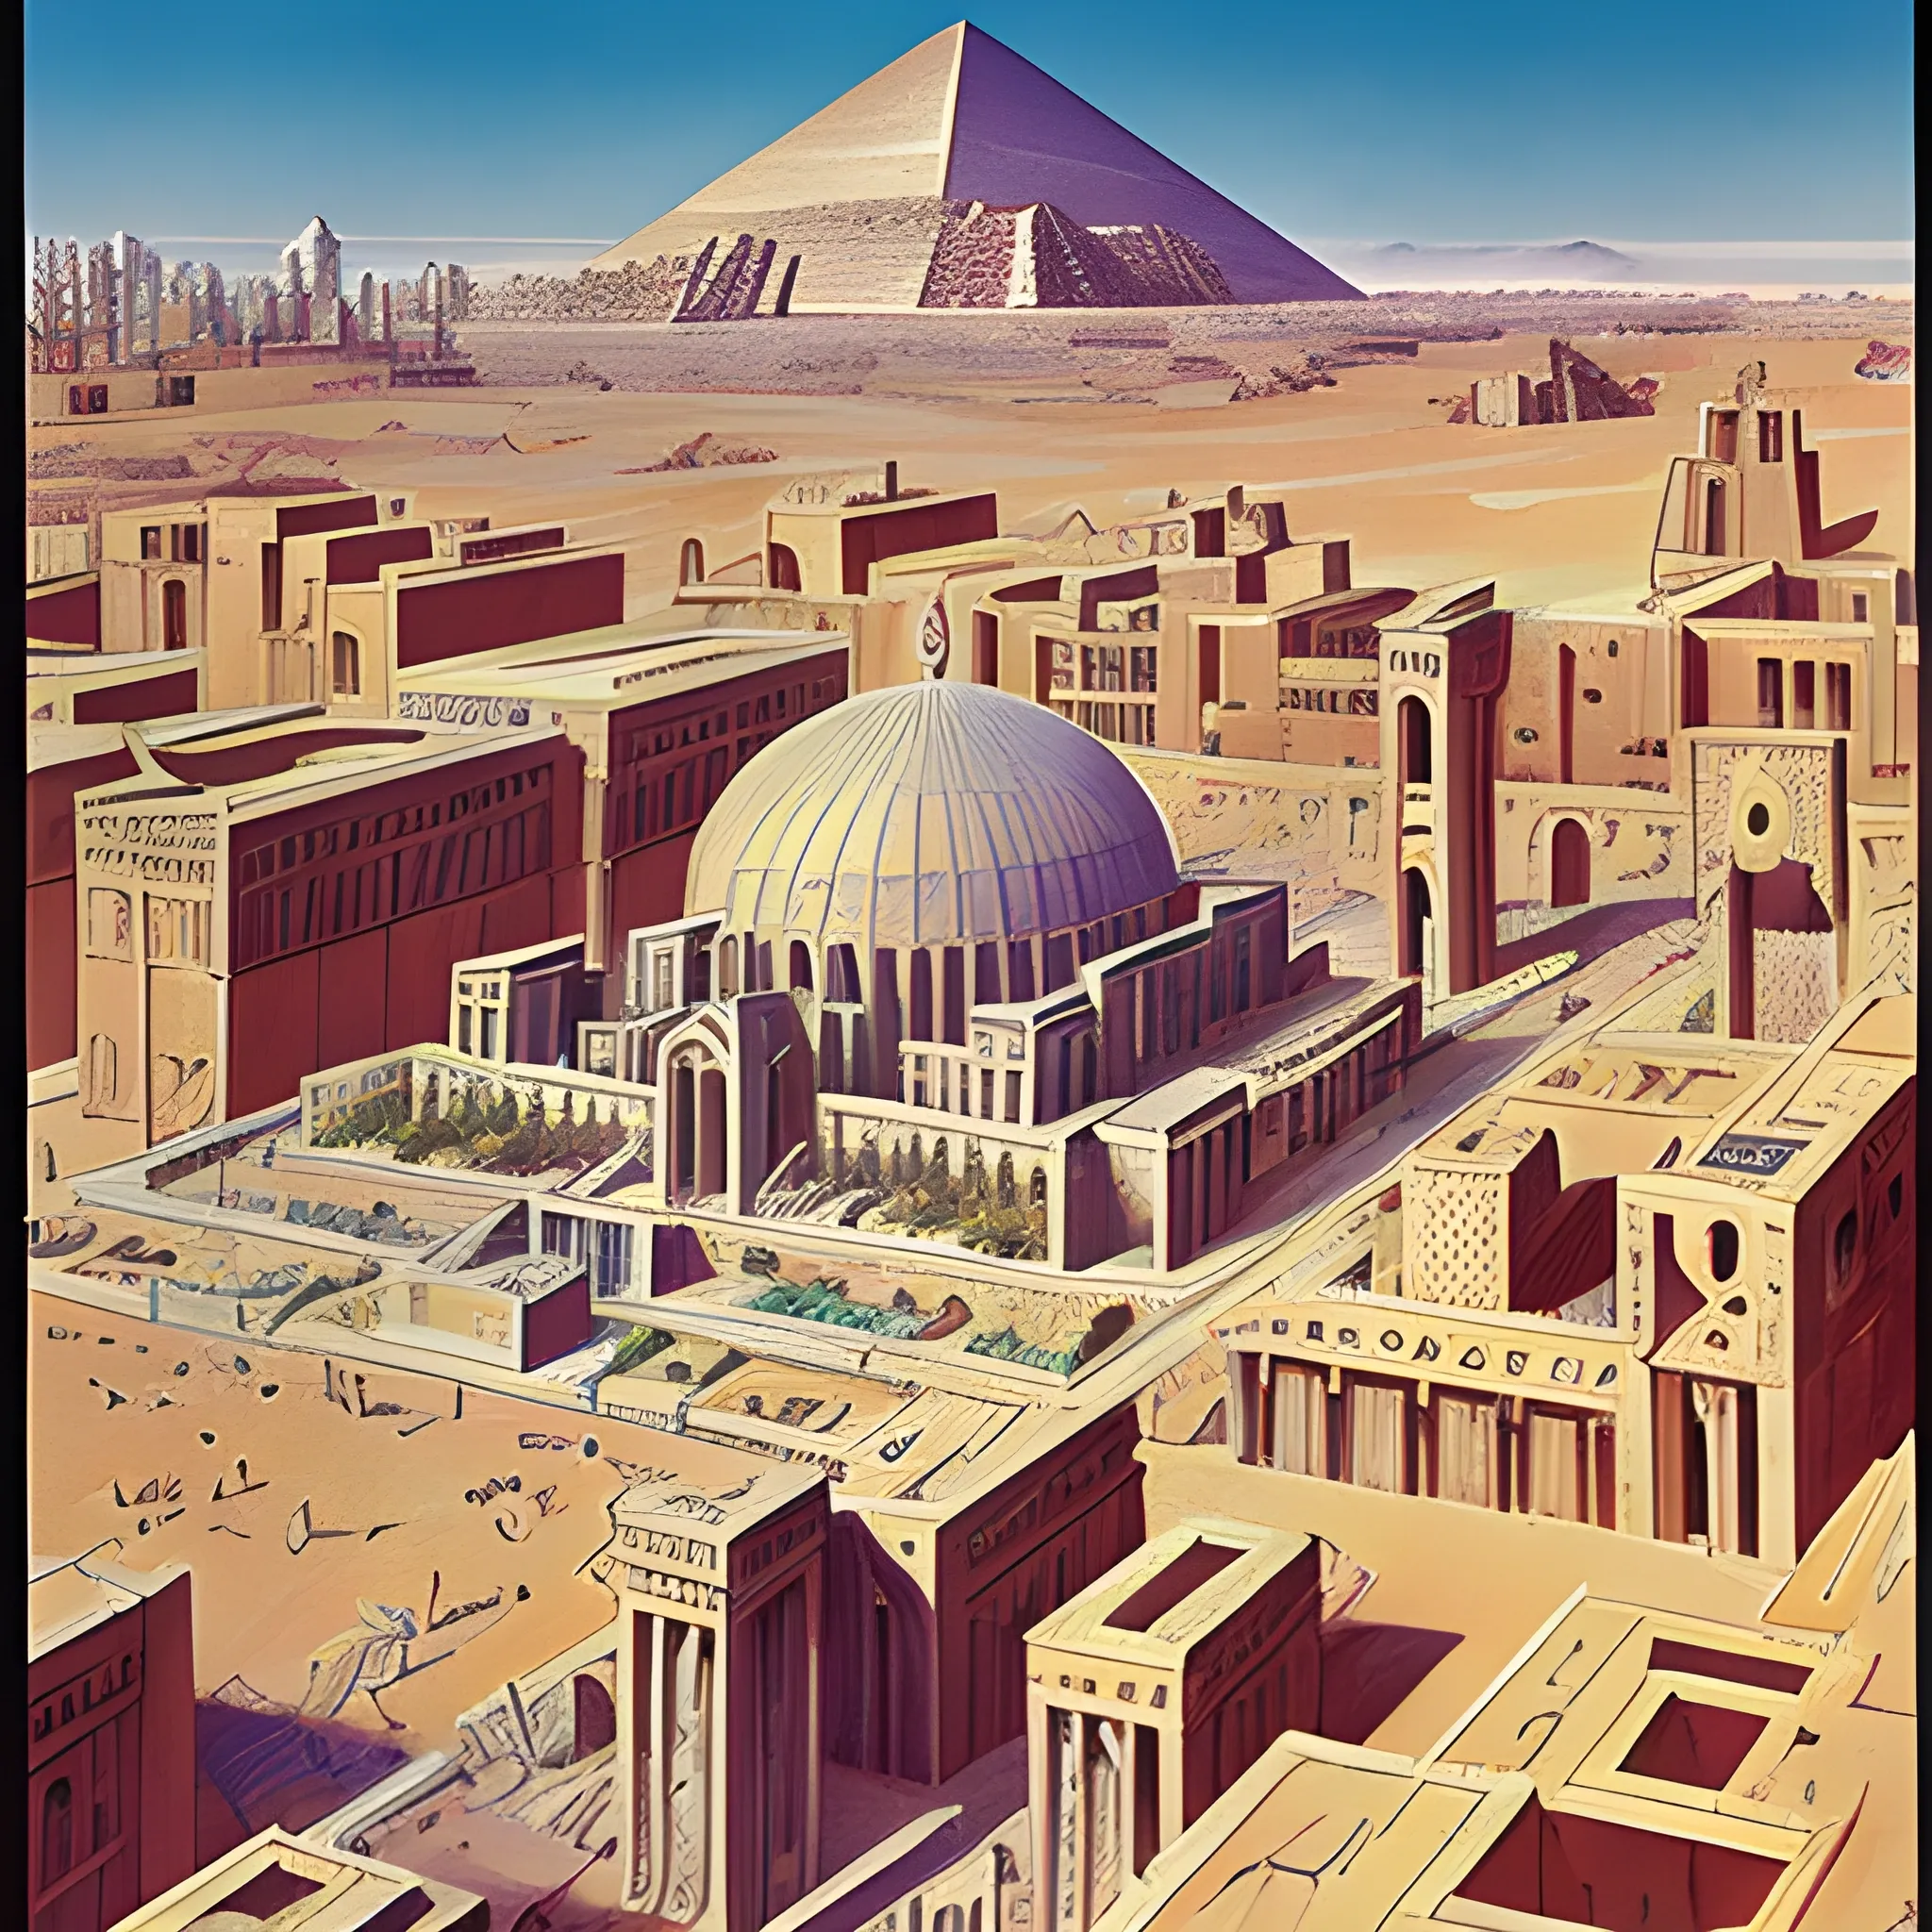 1960 Cairo with greek and Egyptian architecture in aspects of the buildings, drawn in jean Giraud's art style, aerial view